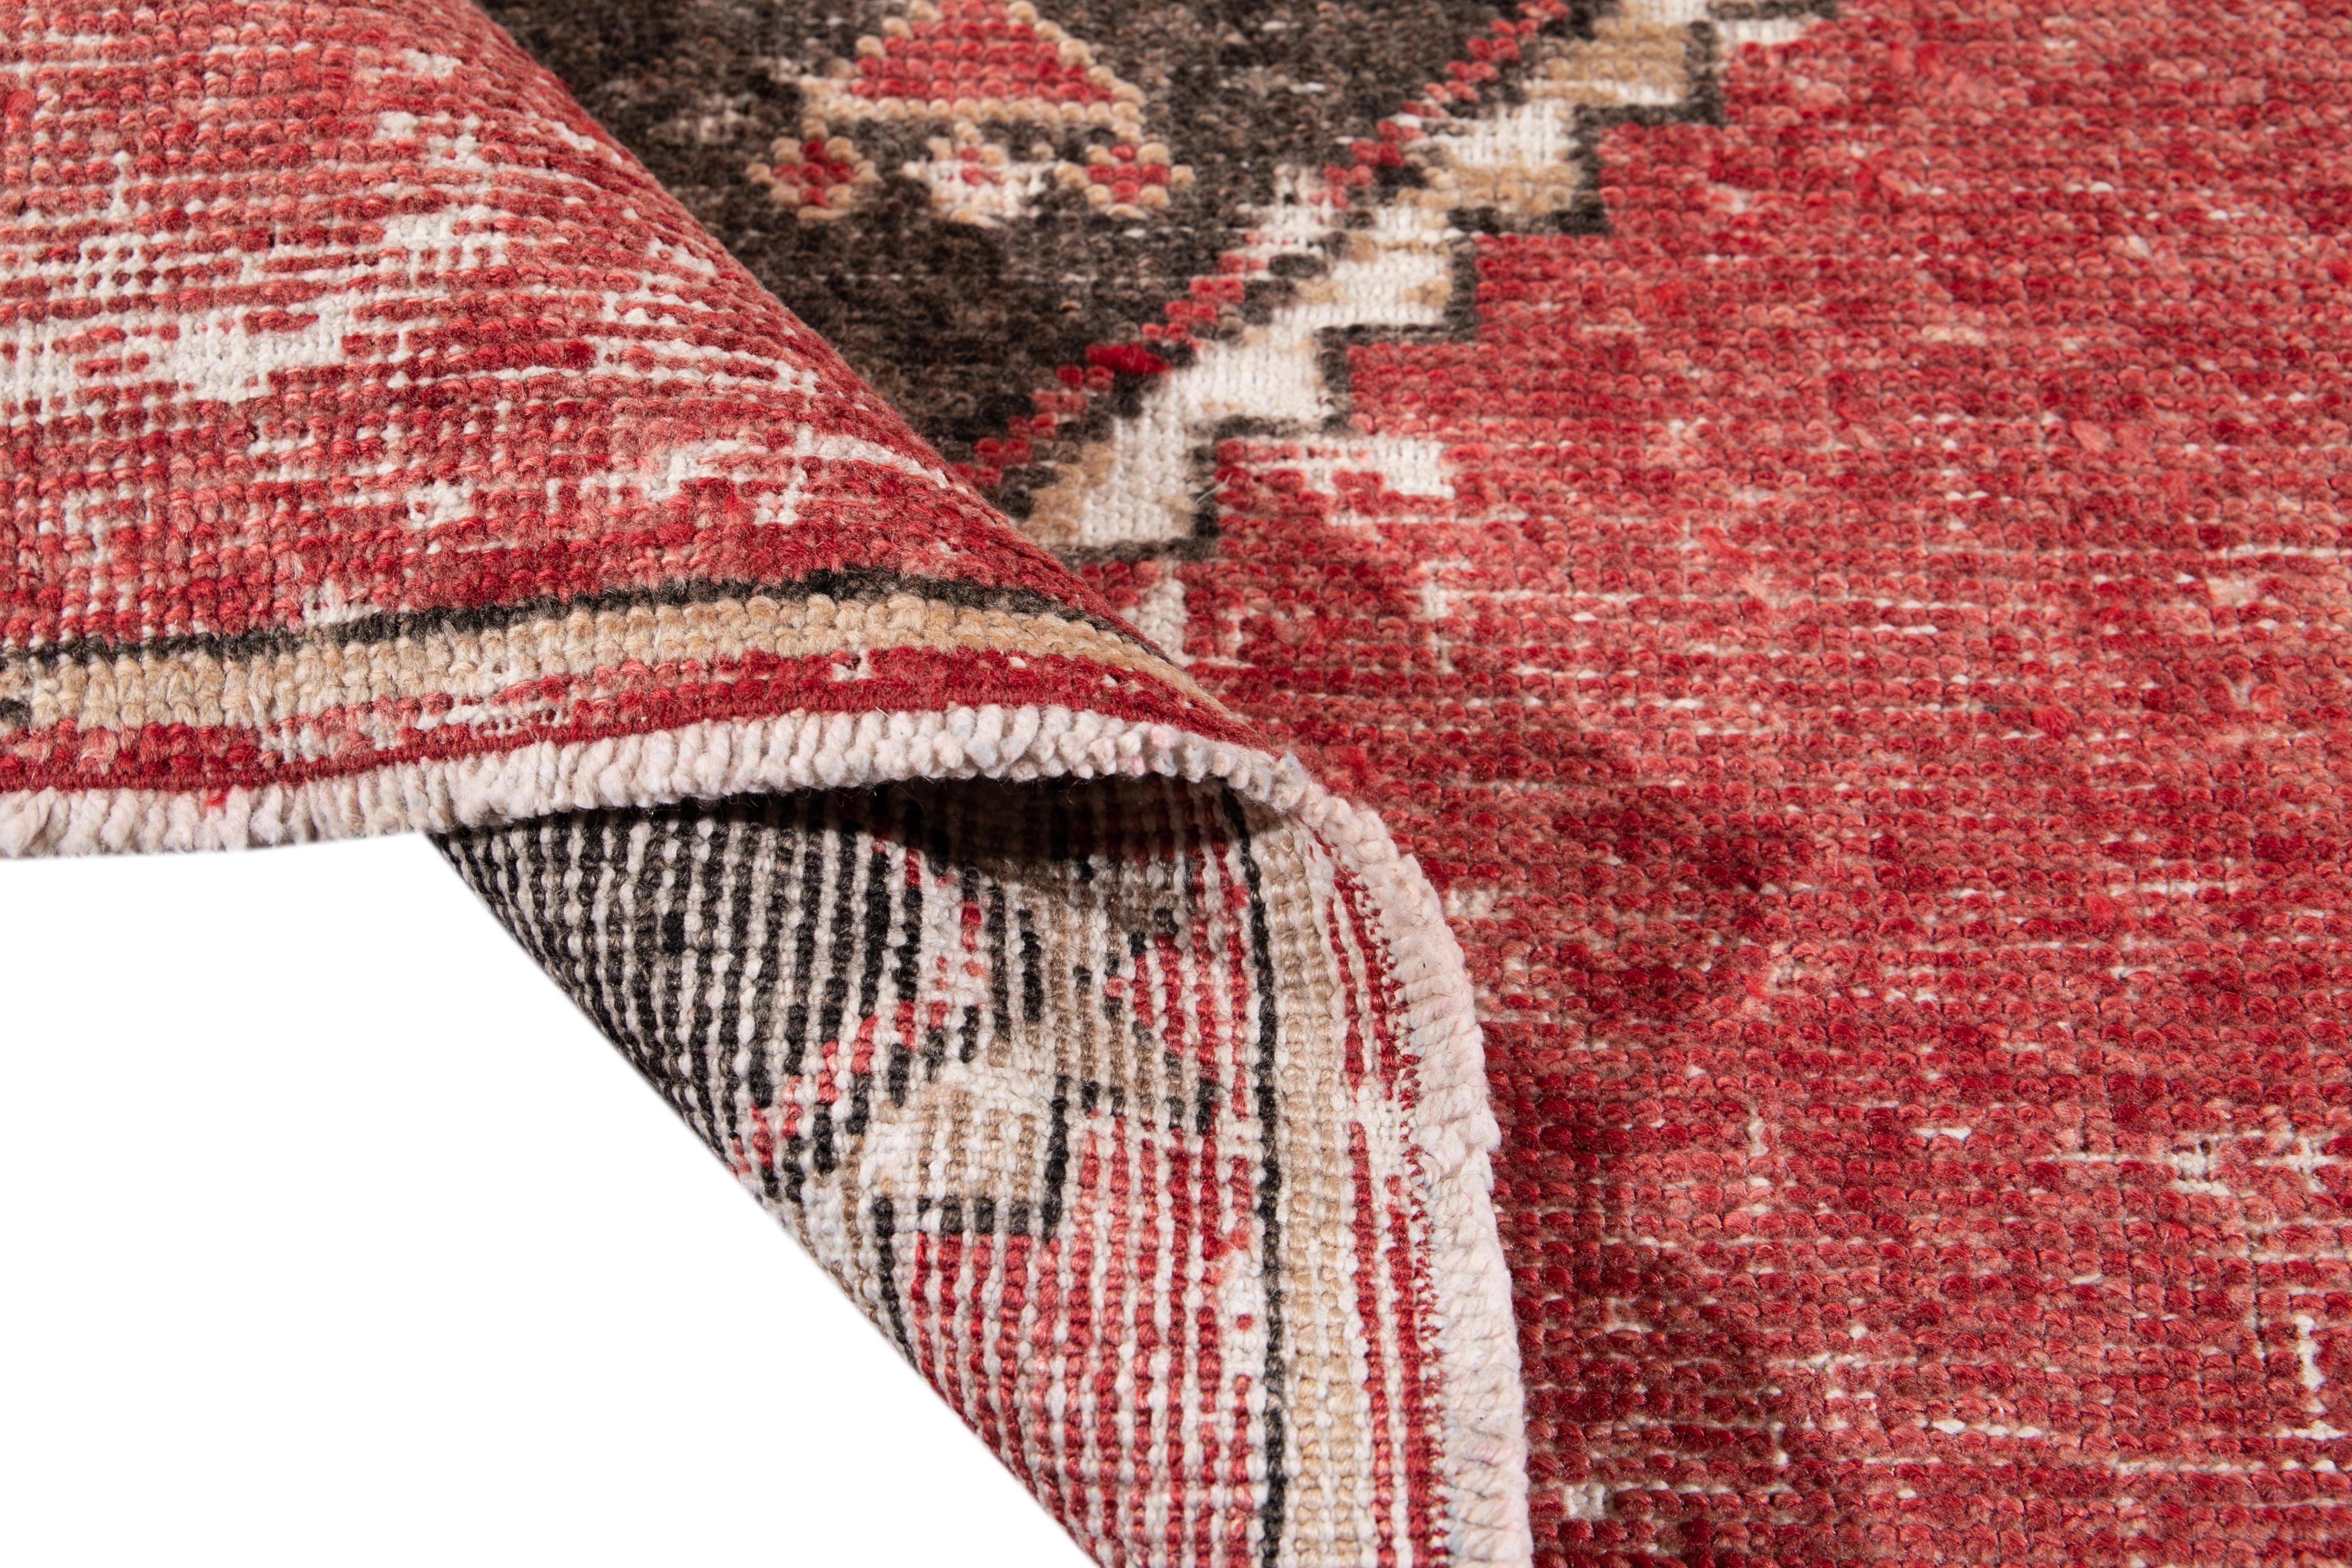 Beautiful vintage Turkish hand knotted wool rug with a red field. This rug has accents of brown and beige in a gorgeous all-over geometric design,

This rug measures: 3'1